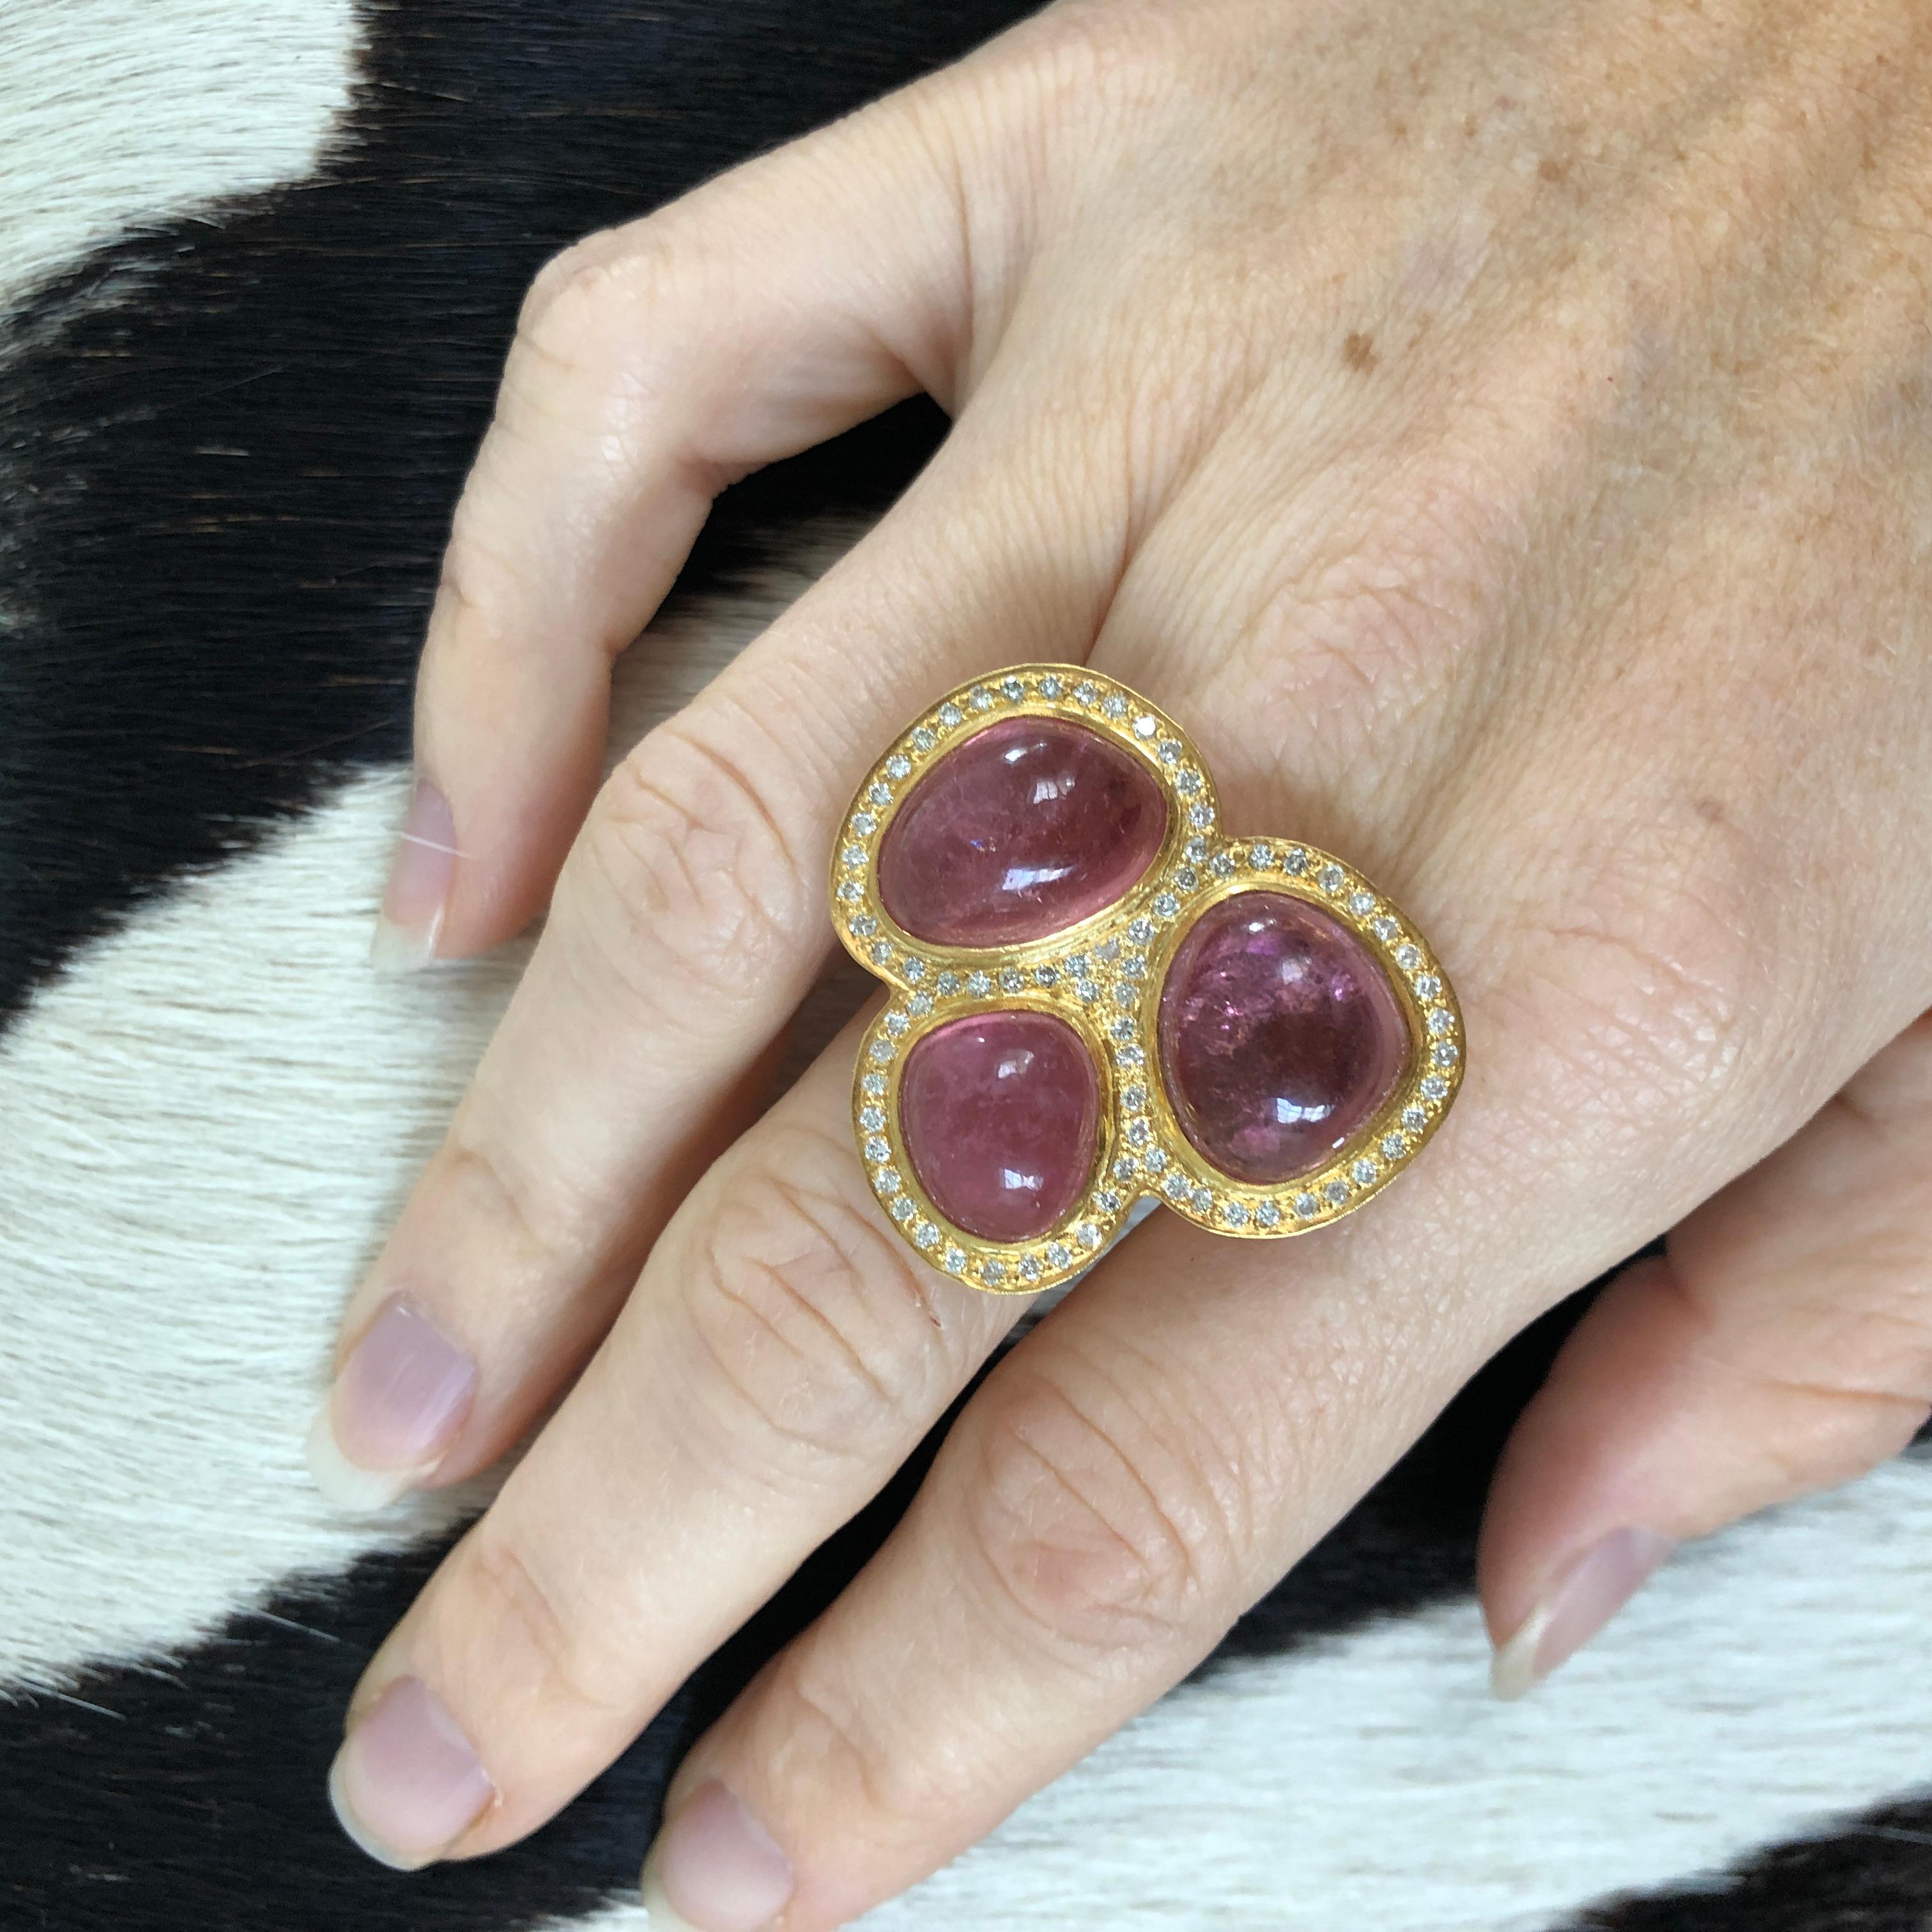 22.91 Carat Pink Tourmaline Diamond Cocktail Ring by Lauren Harper In New Condition For Sale In Winnetka, IL